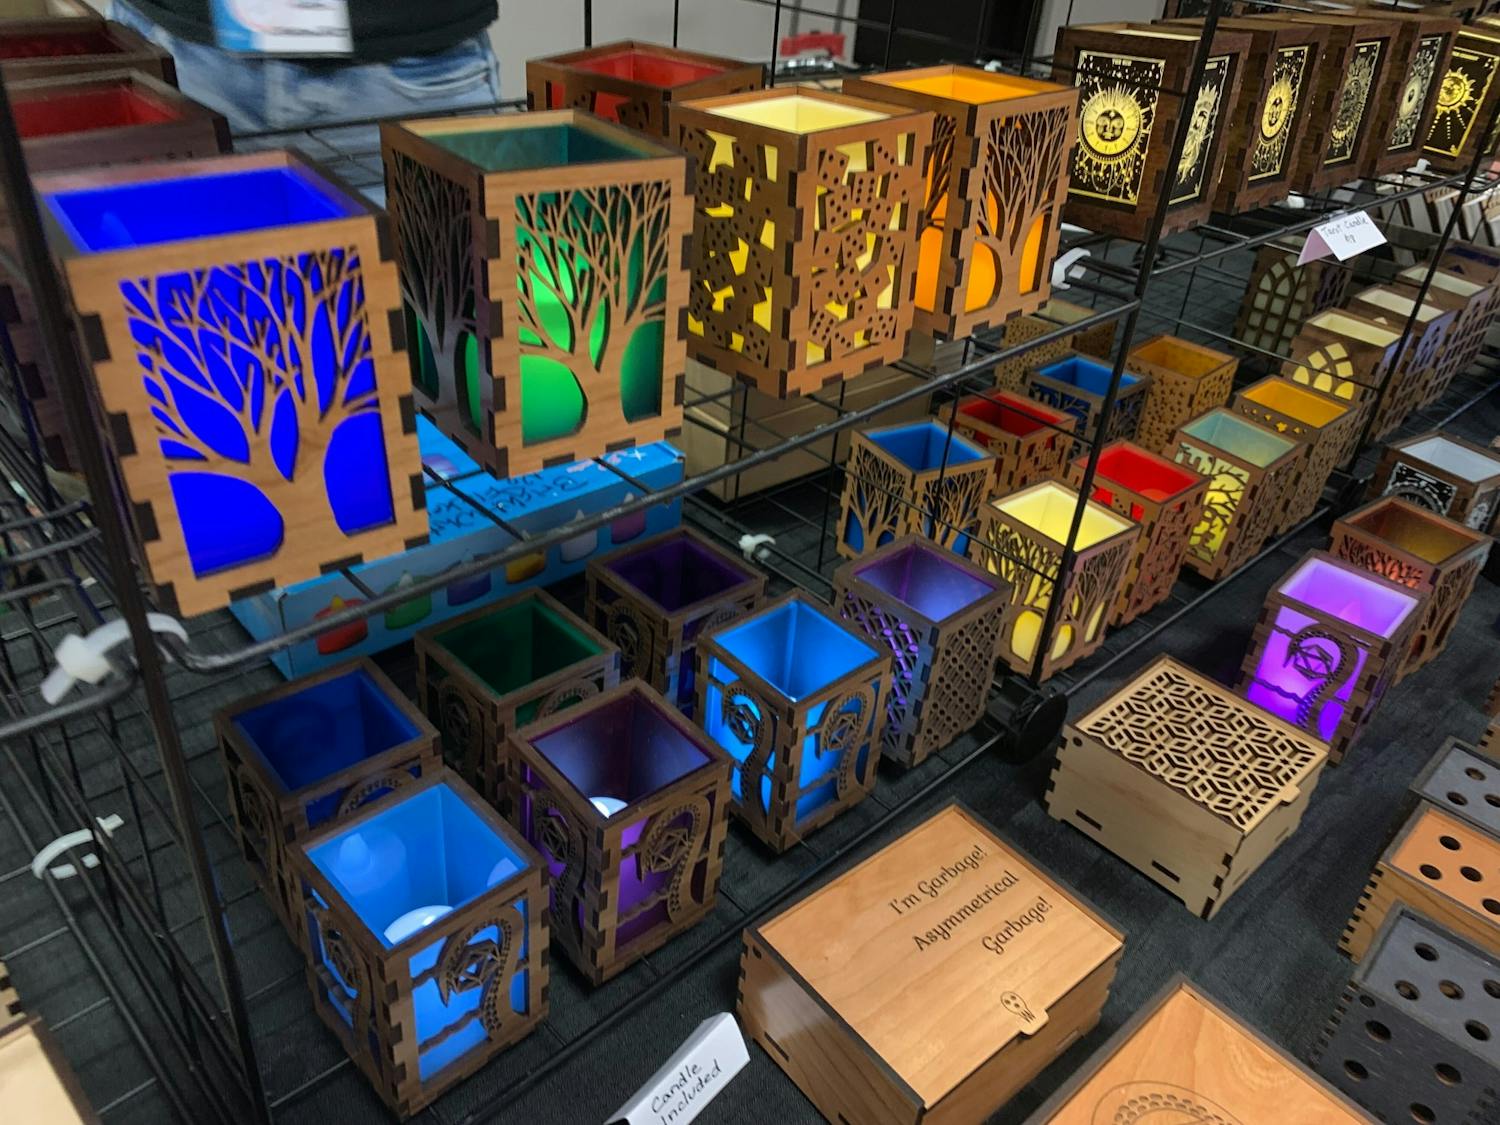 Wooden storage boxes and light displays were on sale at UBCon XXXI.